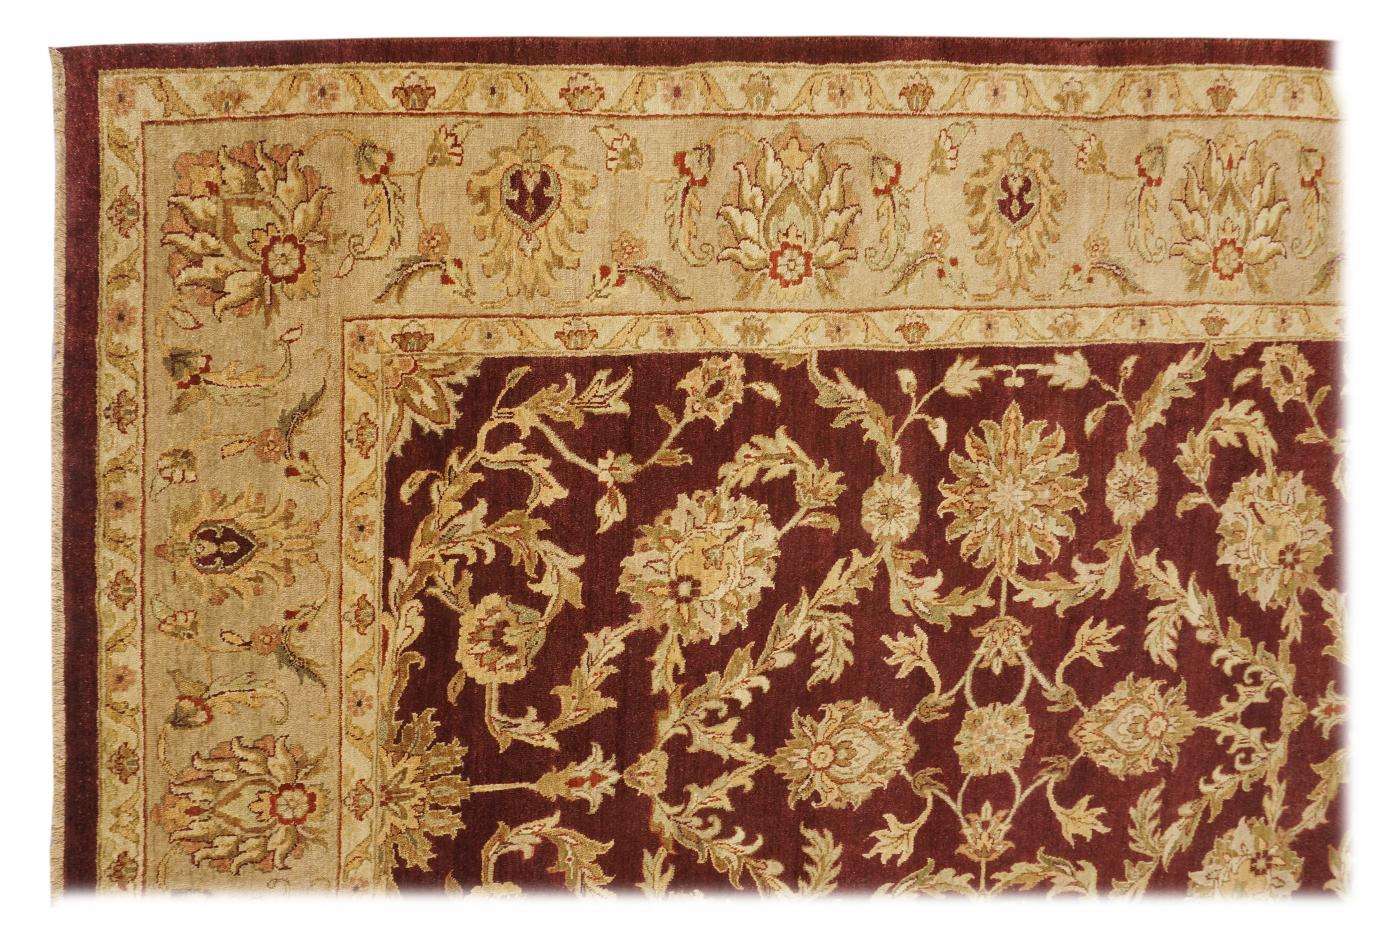 Hand Knotted Carpets 7-42 J-7A Burgundy-Camel 8x10